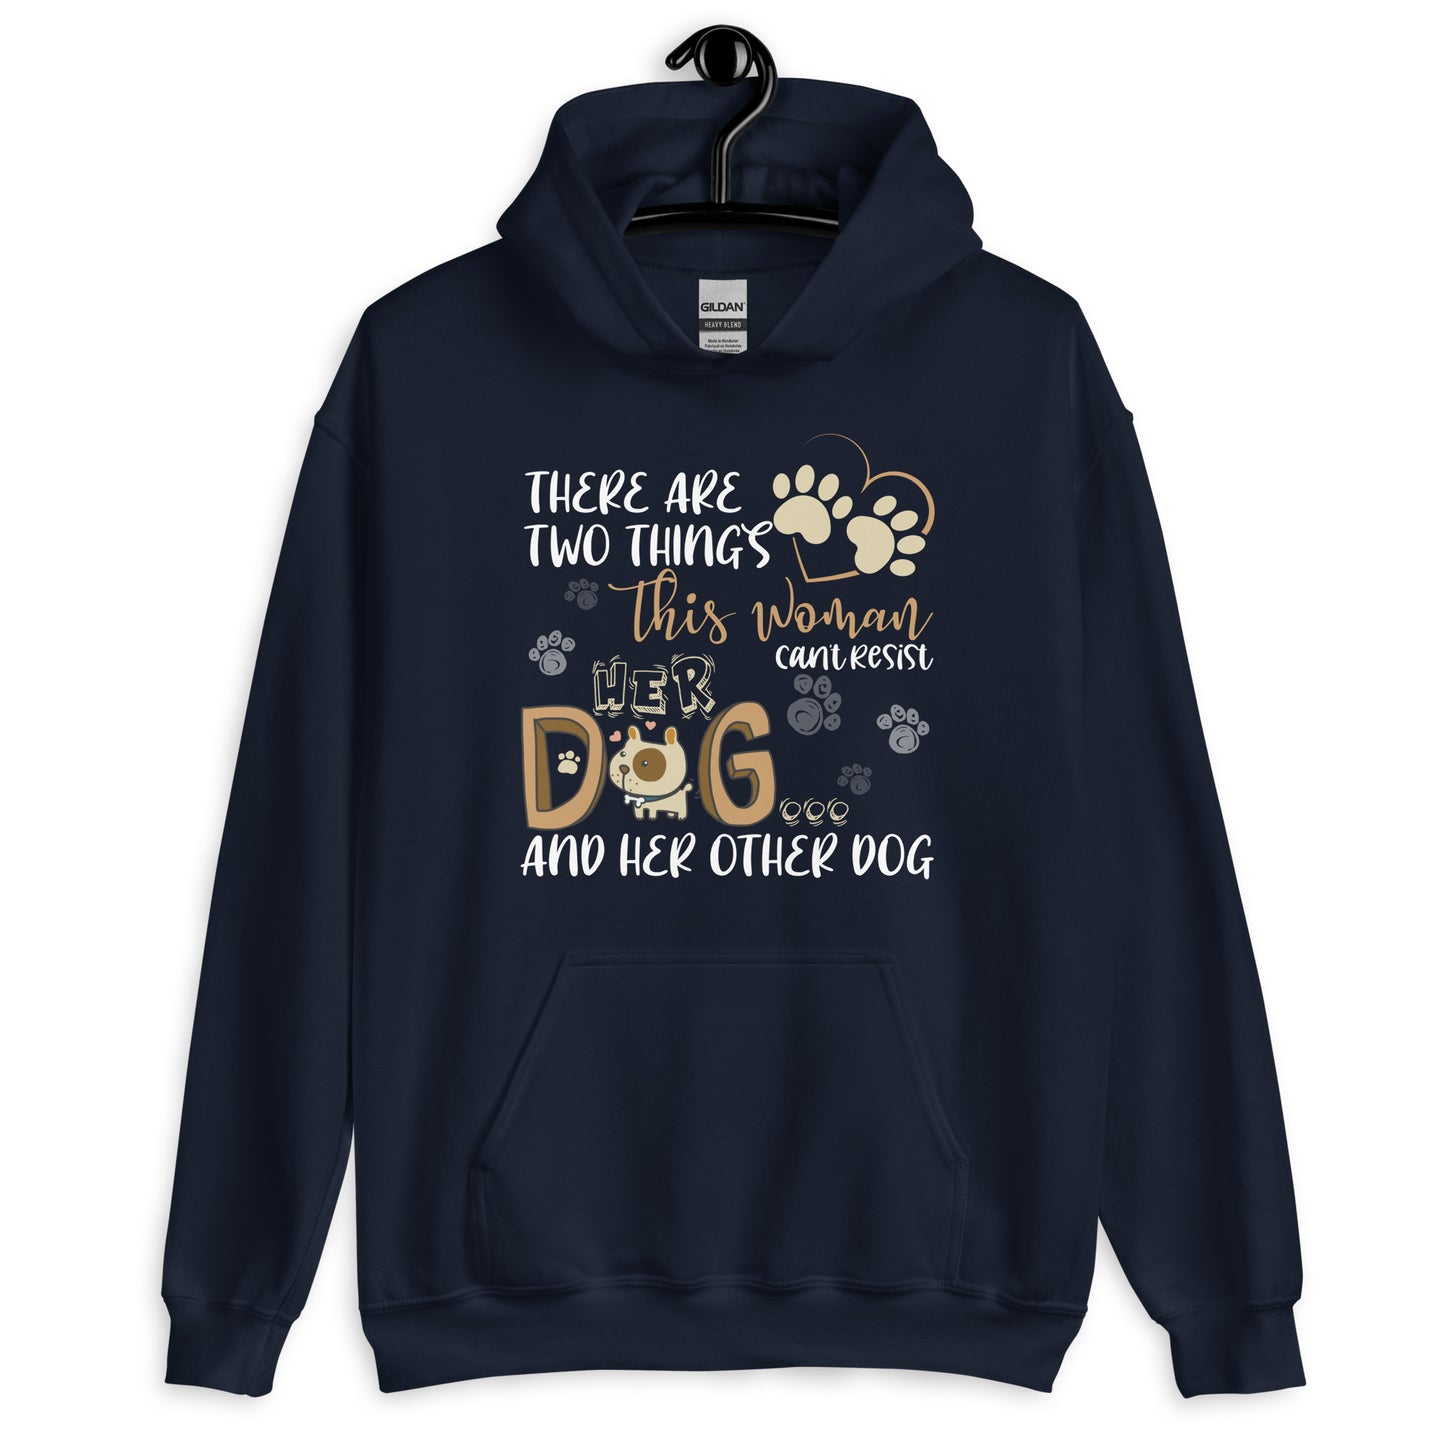 This Woman Can't Resist Her Dog and Her Other Dog Hoodie